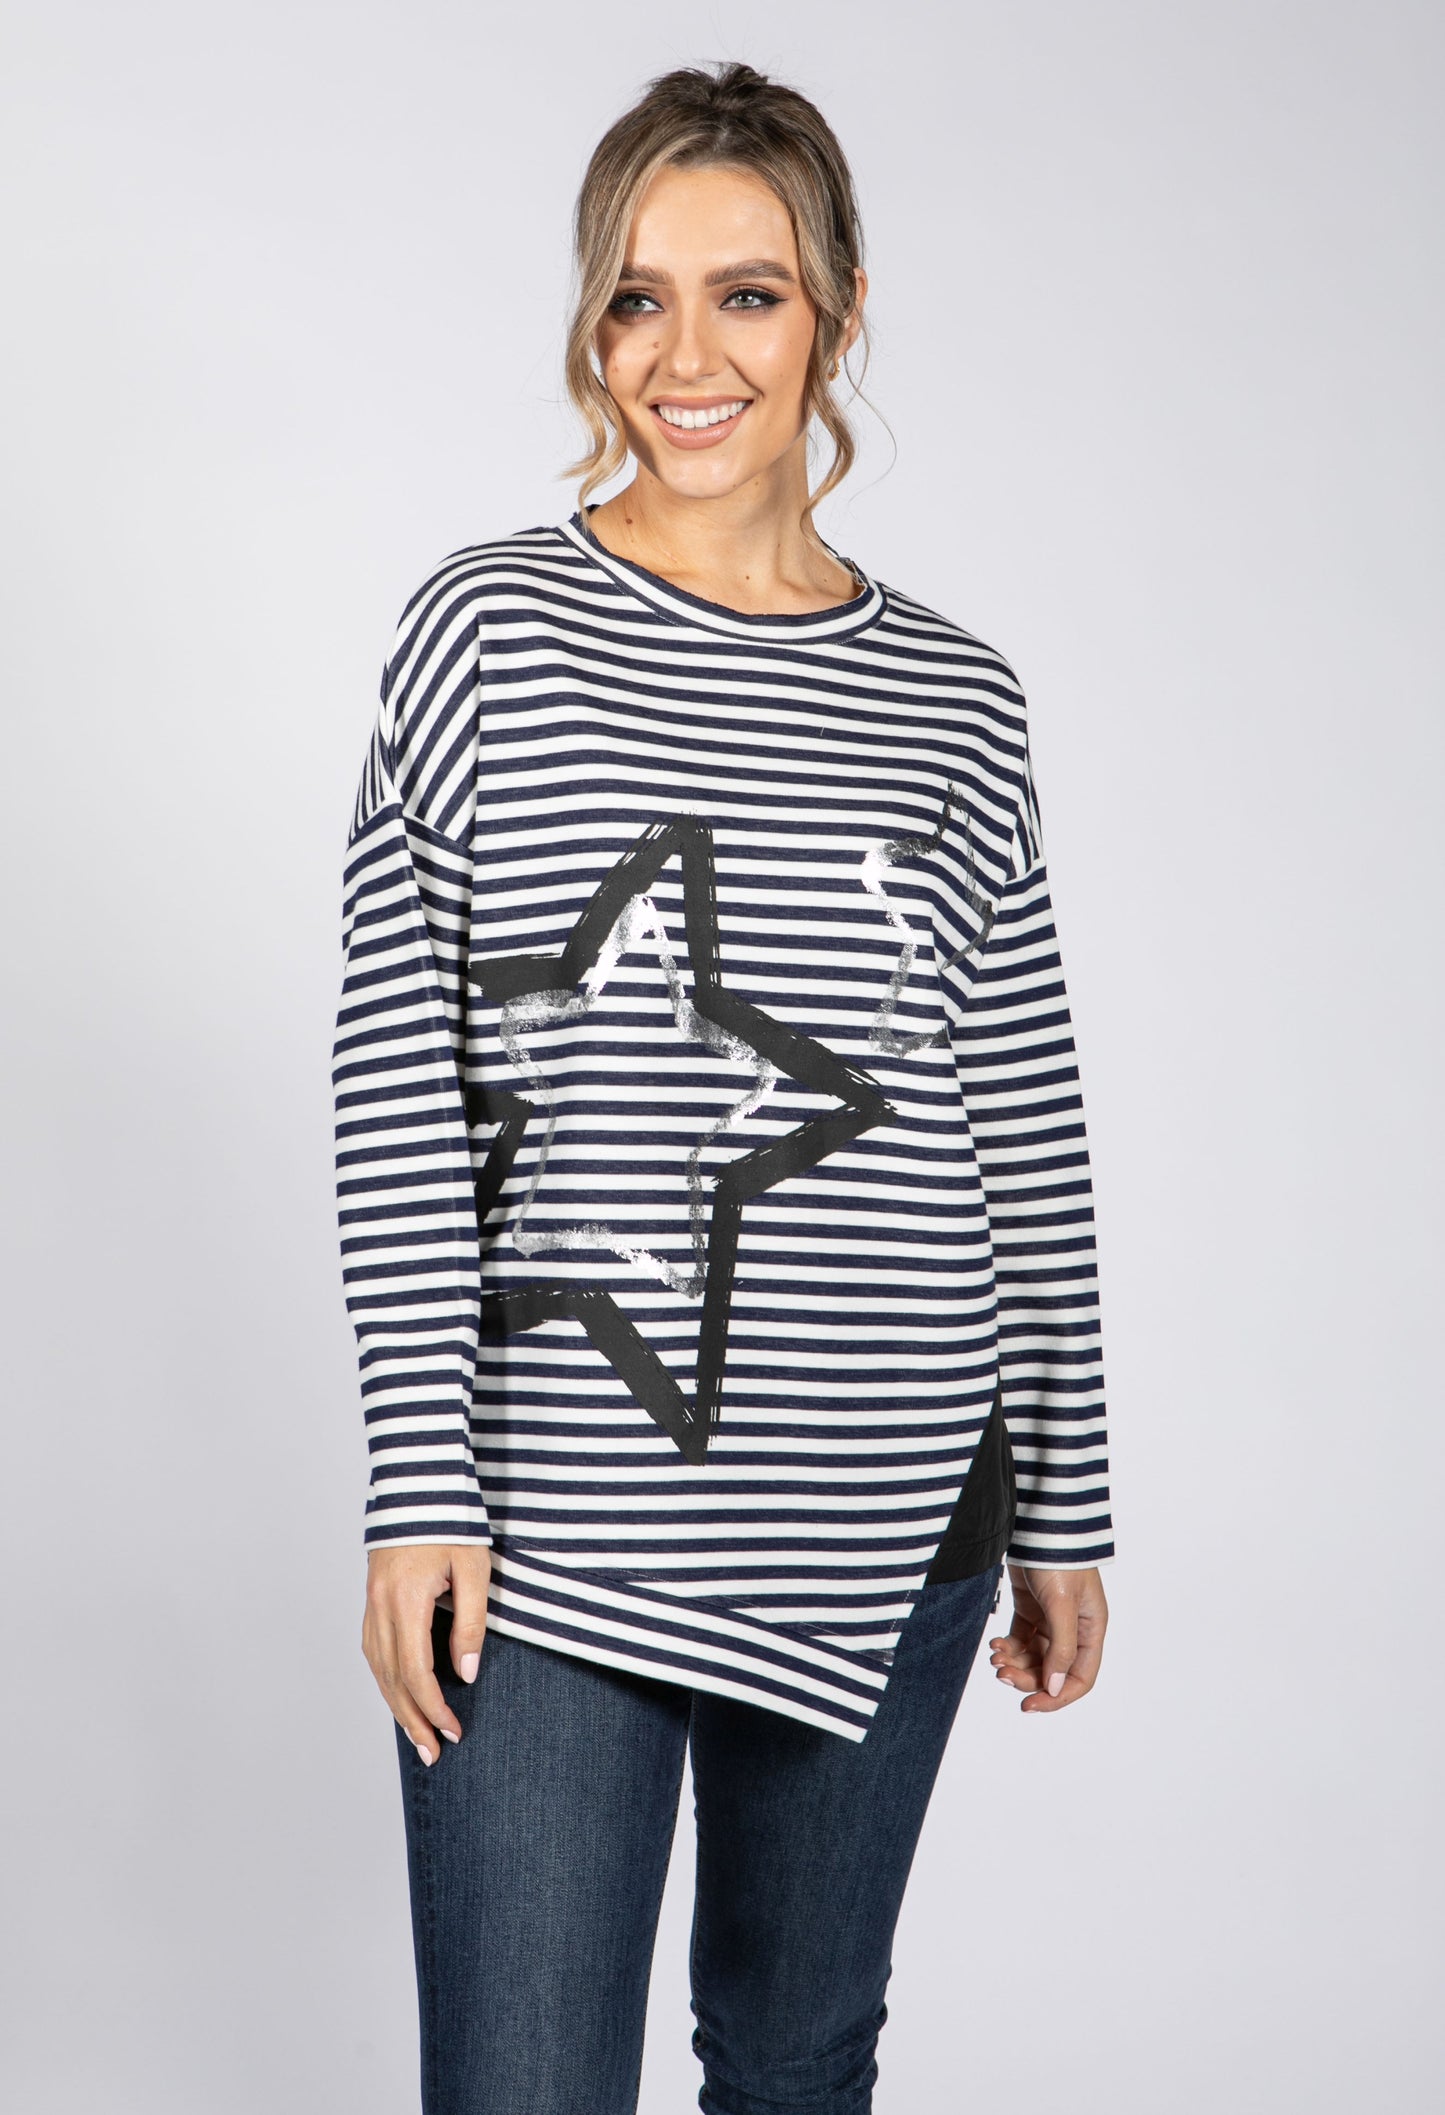 Over Sized Striped Star Top in Navy & Off-White